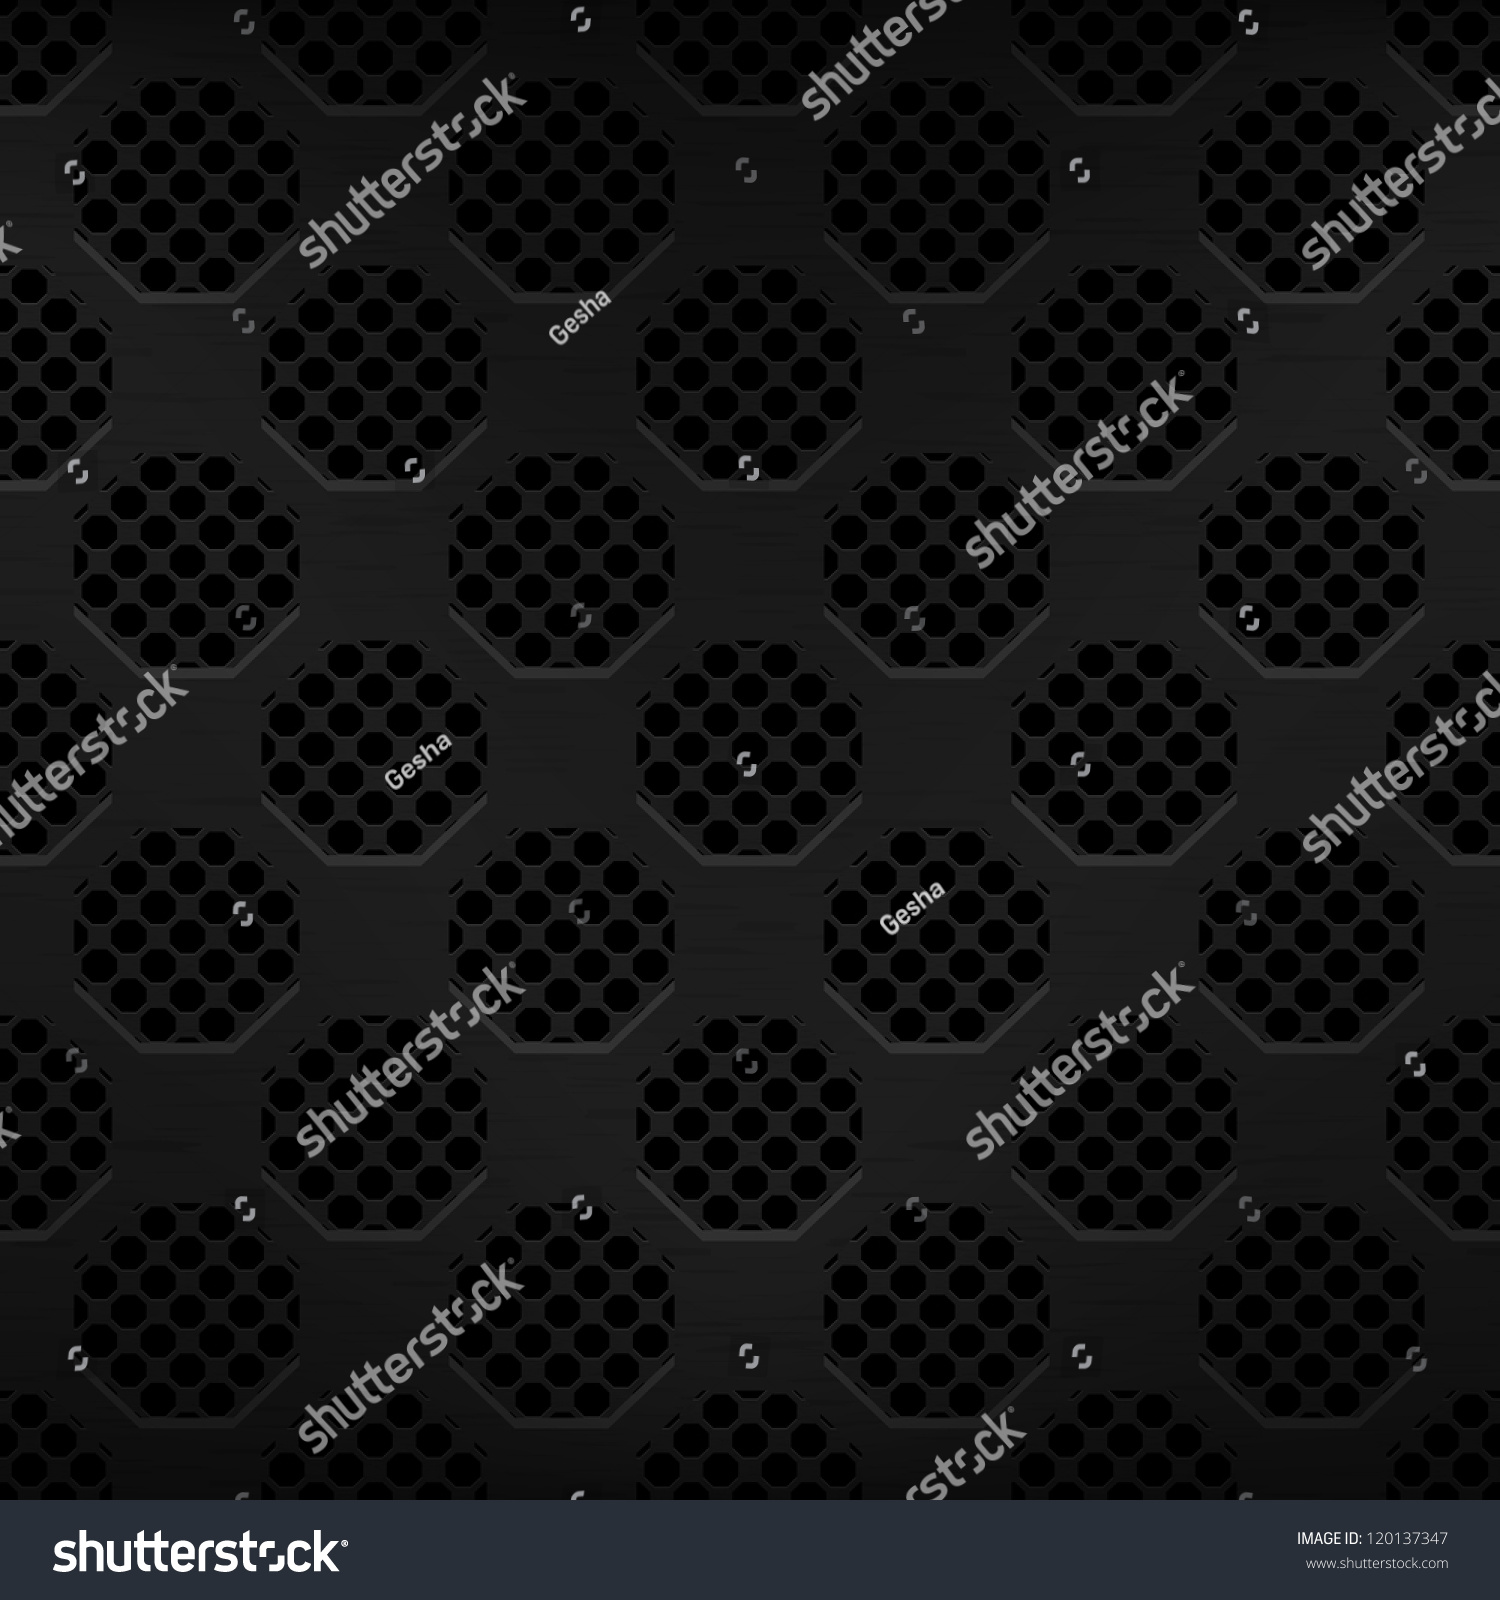 Seamless Texture Black Metal Surface Dotted Octagon Perforated ...